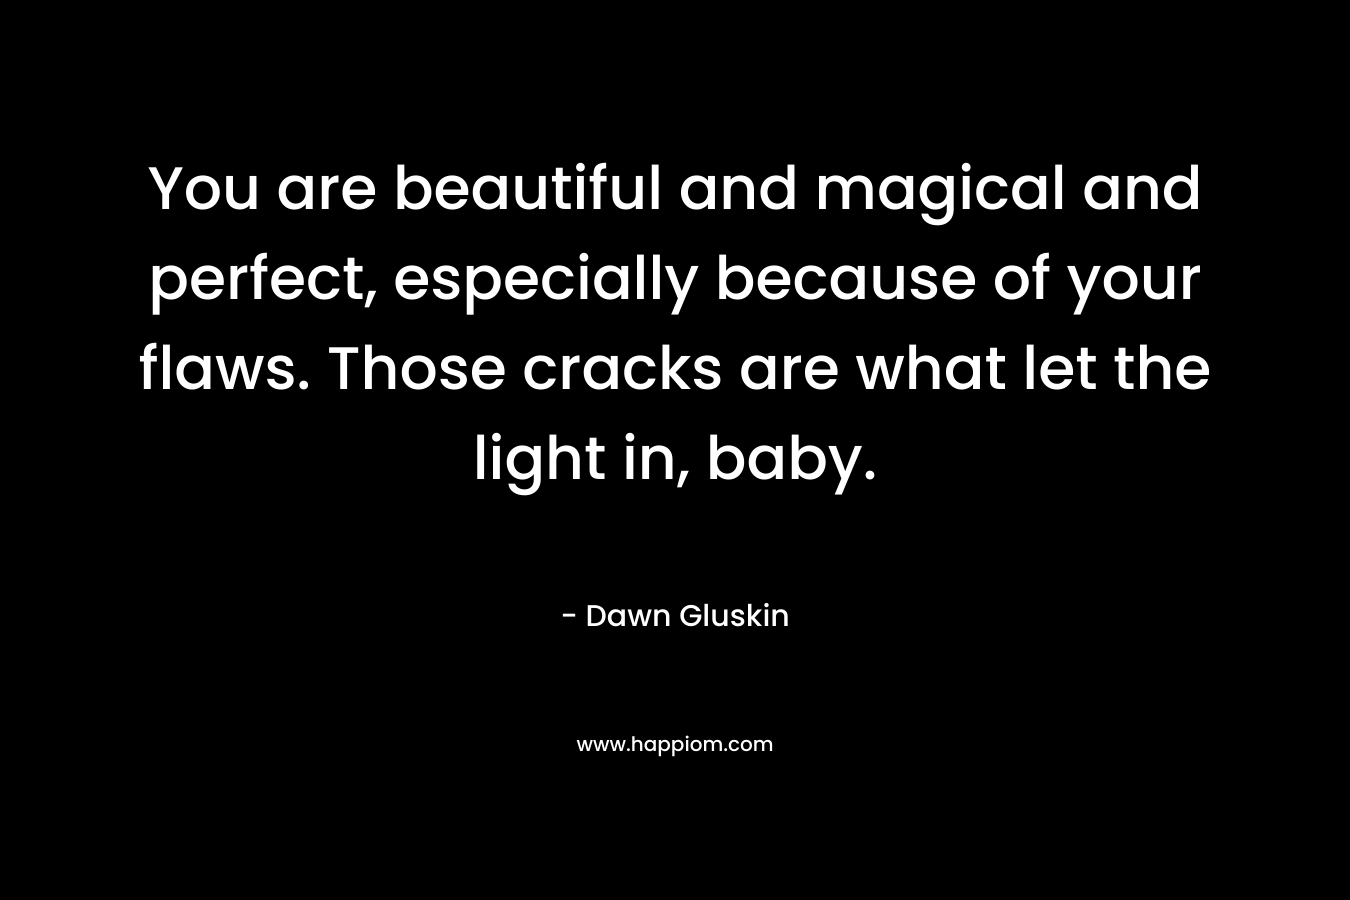 You are beautiful and magical and perfect, especially because of your flaws. Those cracks are what let the light in, baby. – Dawn Gluskin